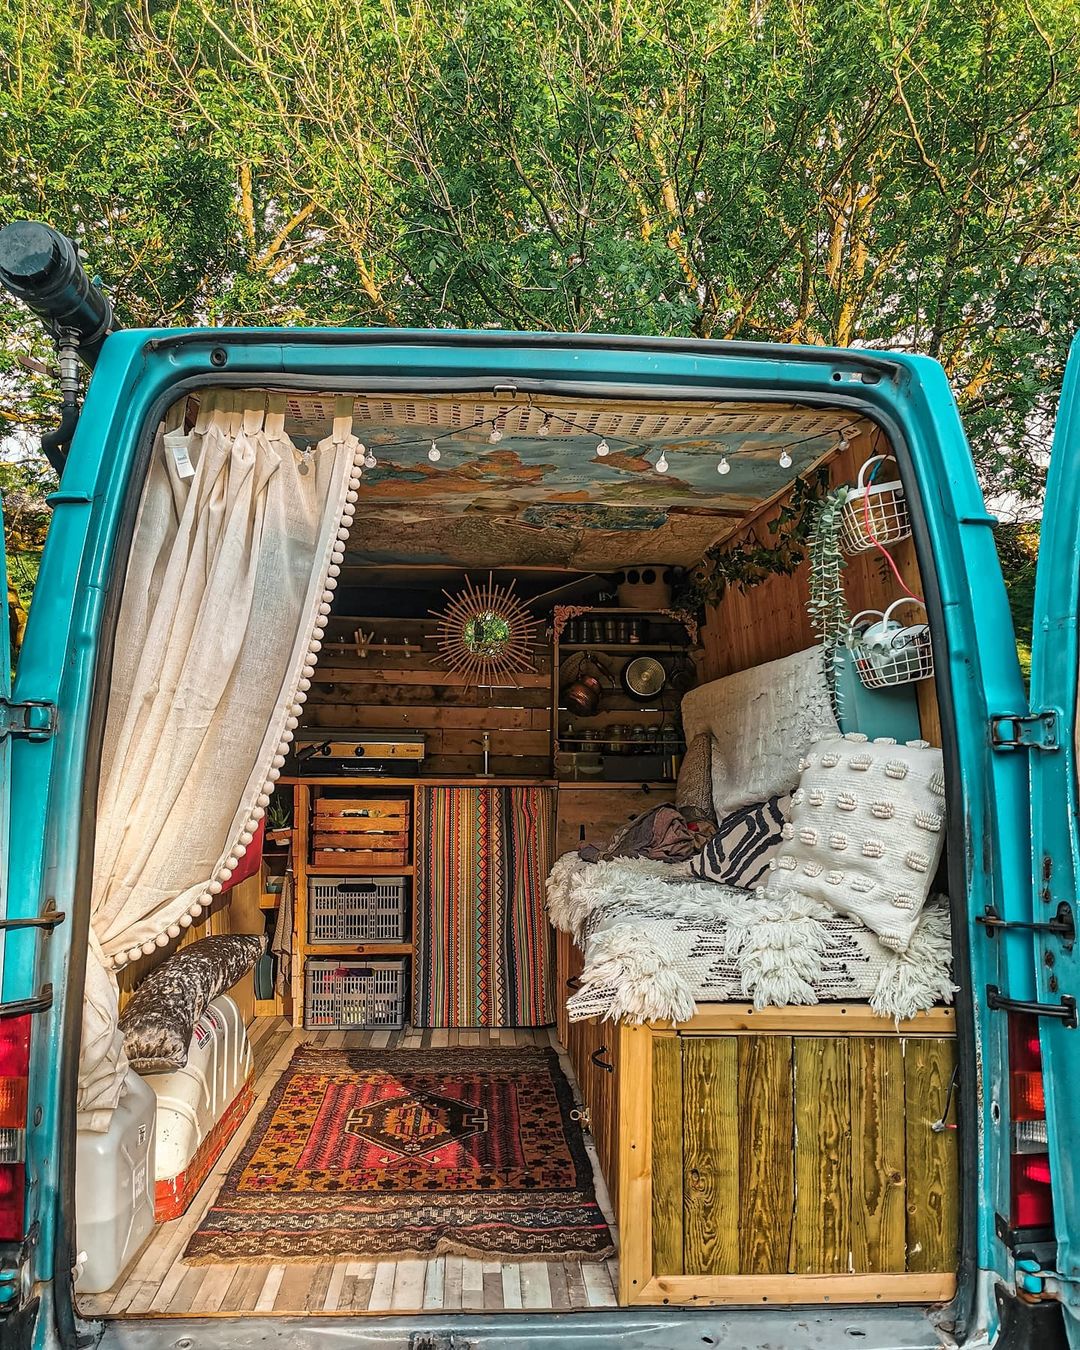 A turquoise van decked out in boho style decorations and accessories.